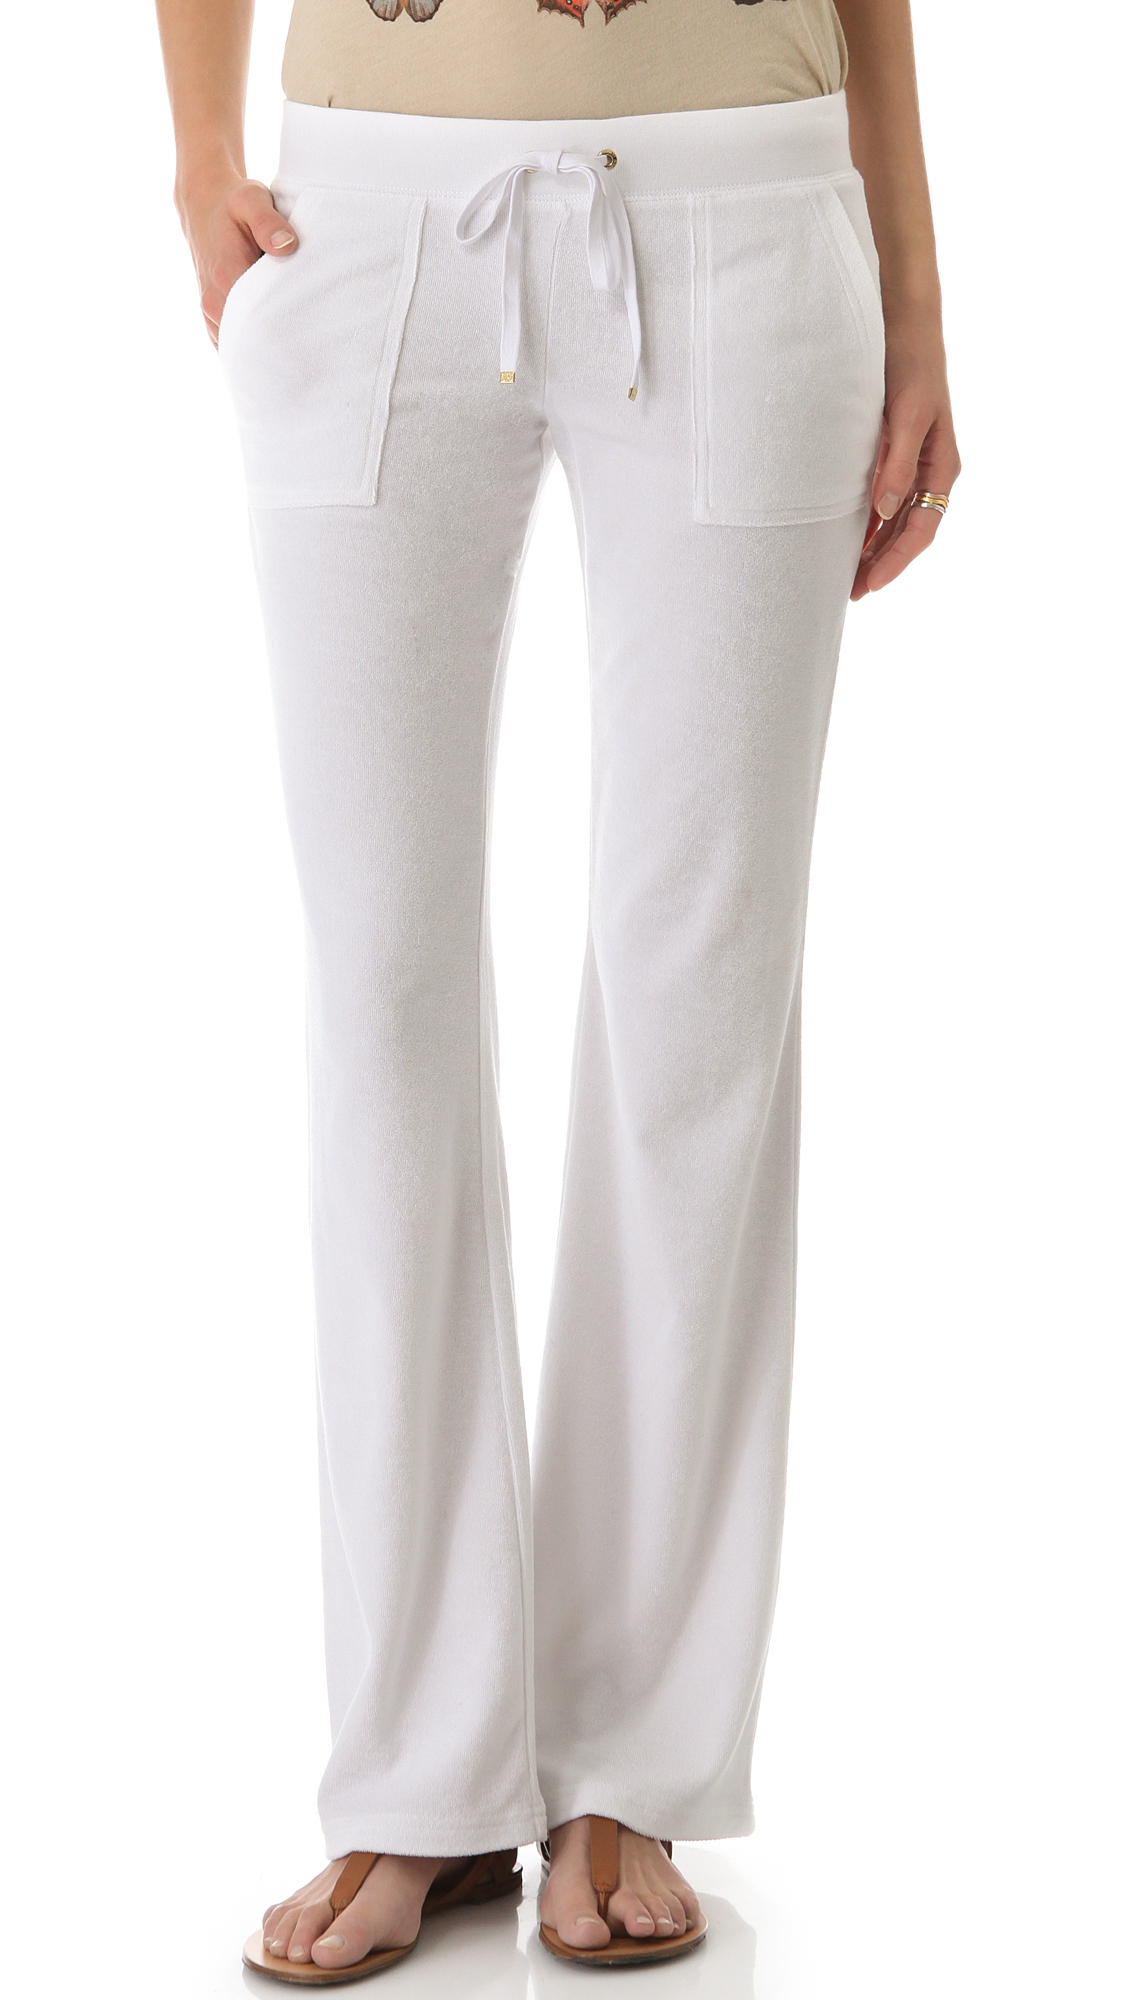 Juicy Couture Boot Cut Pants with Snap Pockets in White | Lyst